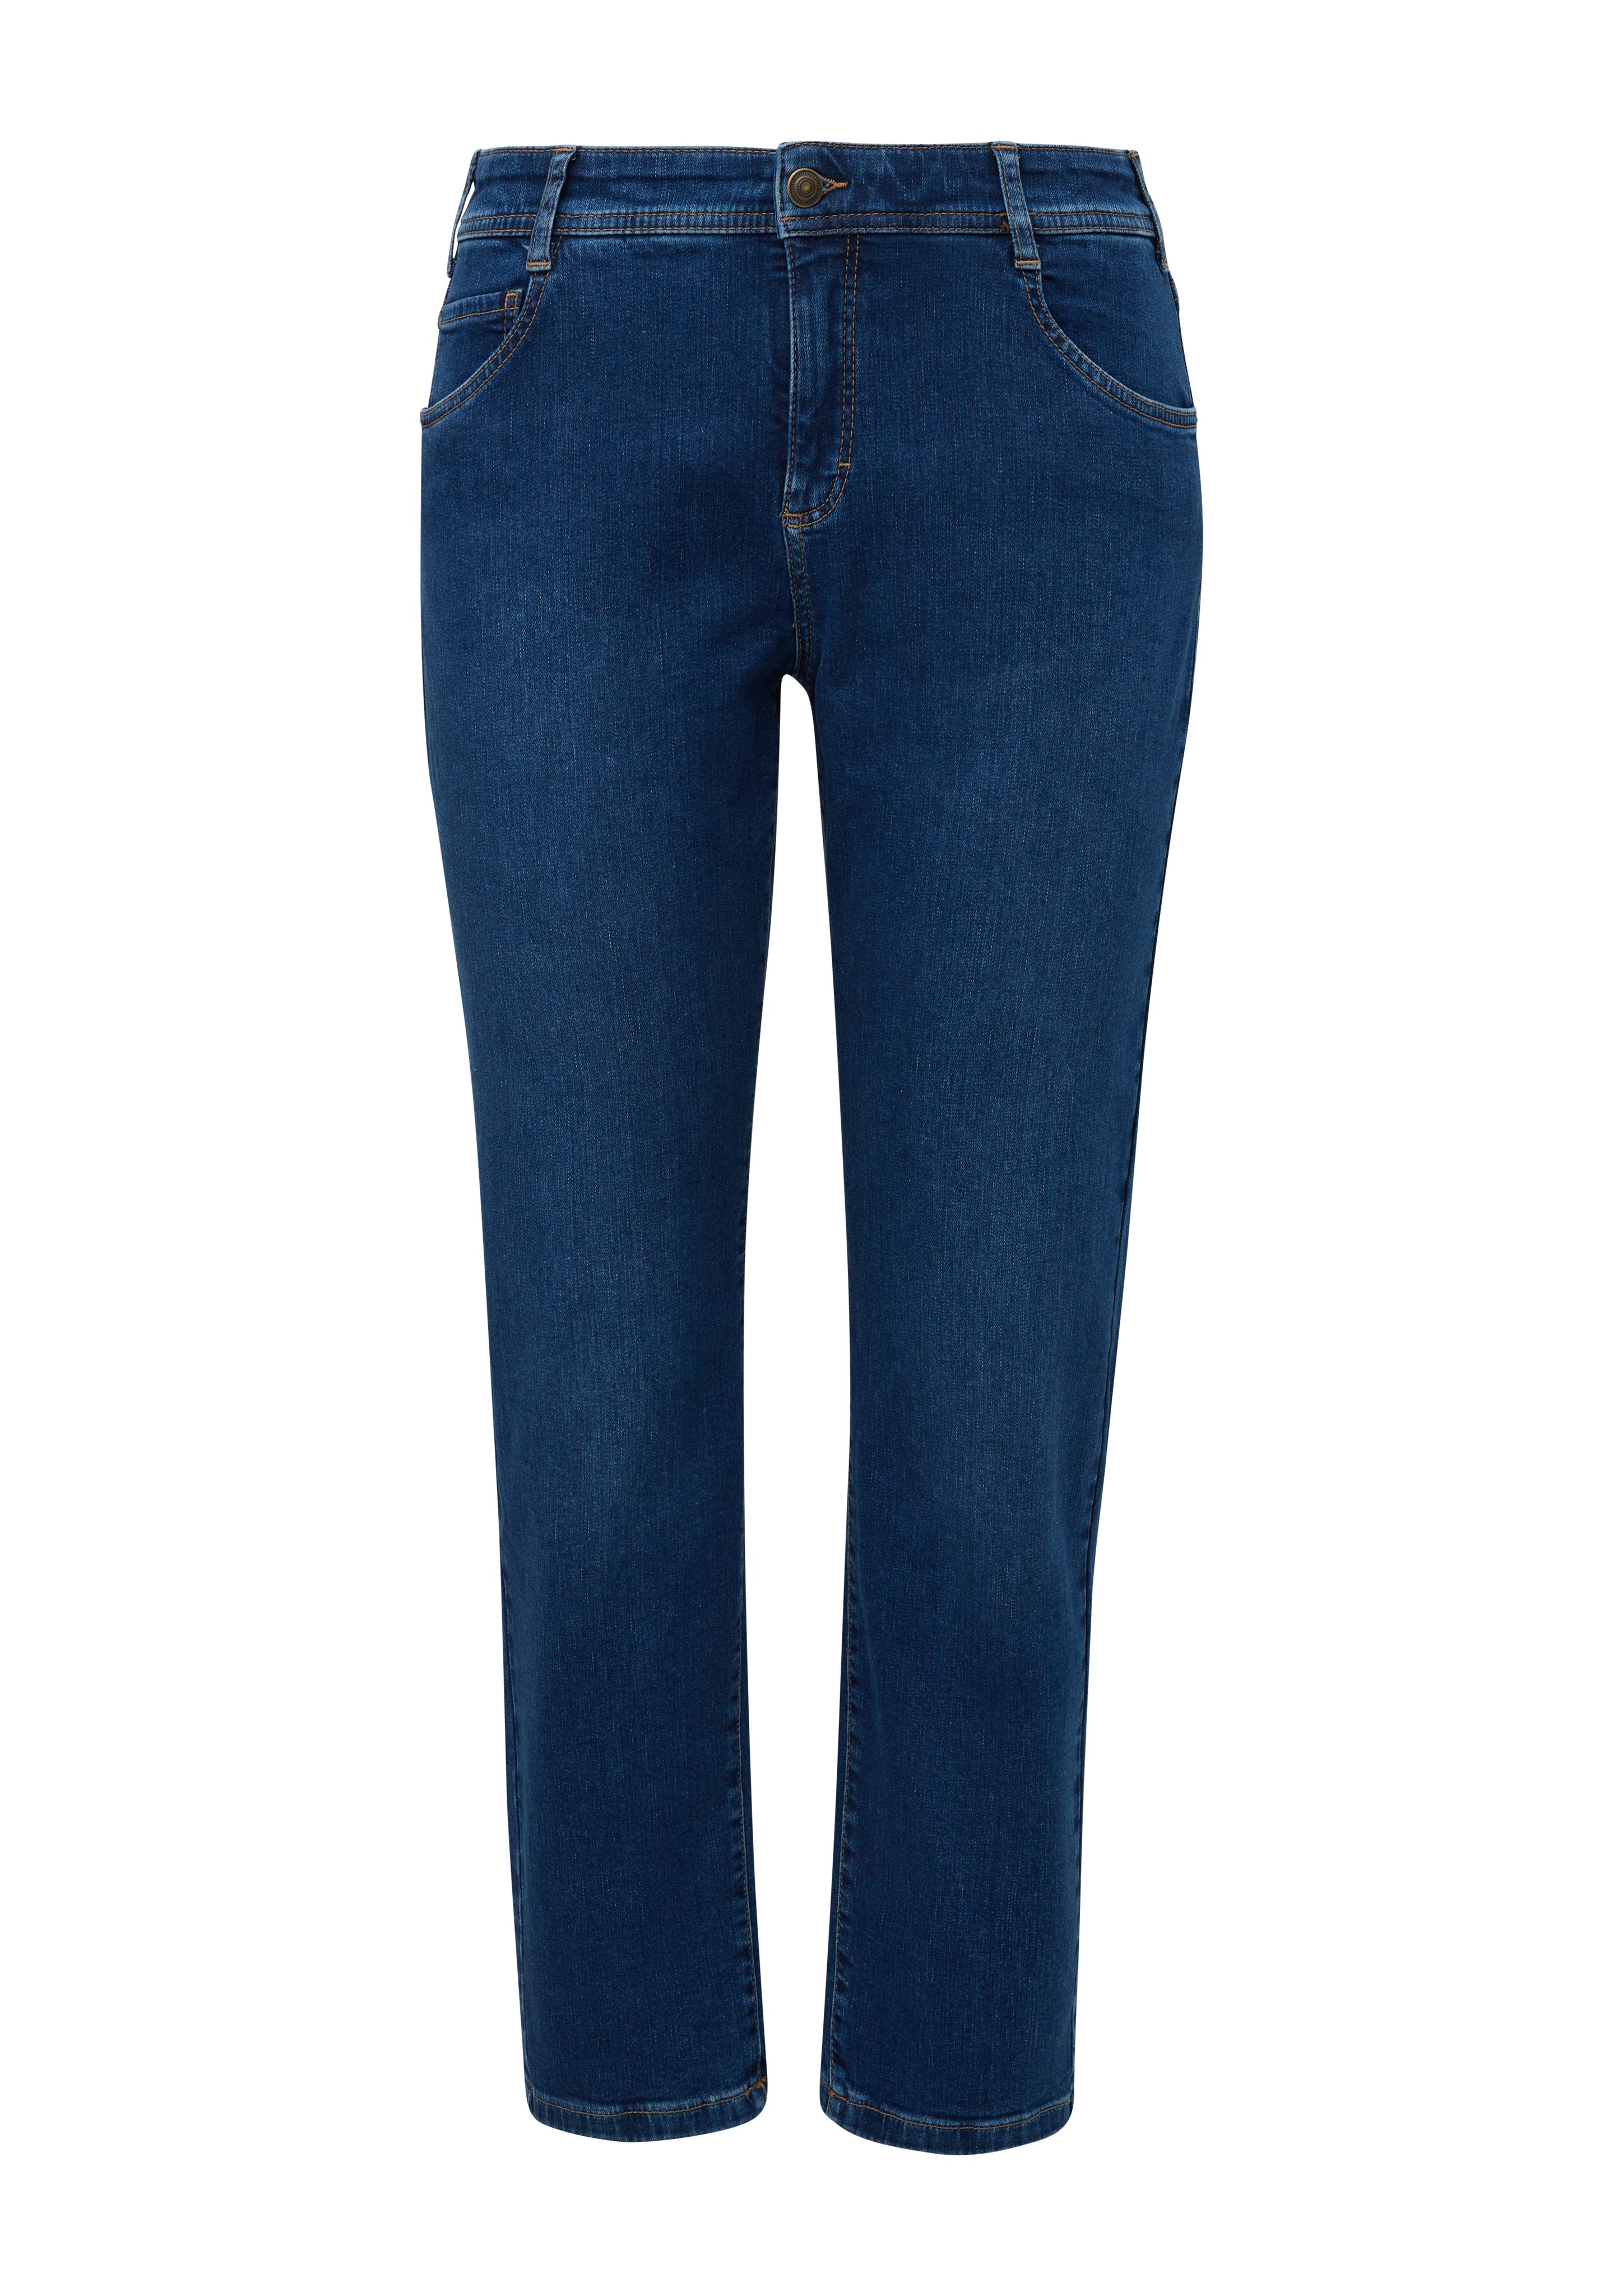 TRIANGLE Stoffhose Jeans / / Waschung, Straight Slim Leg Mid Fit Rise / Kontrastnähte